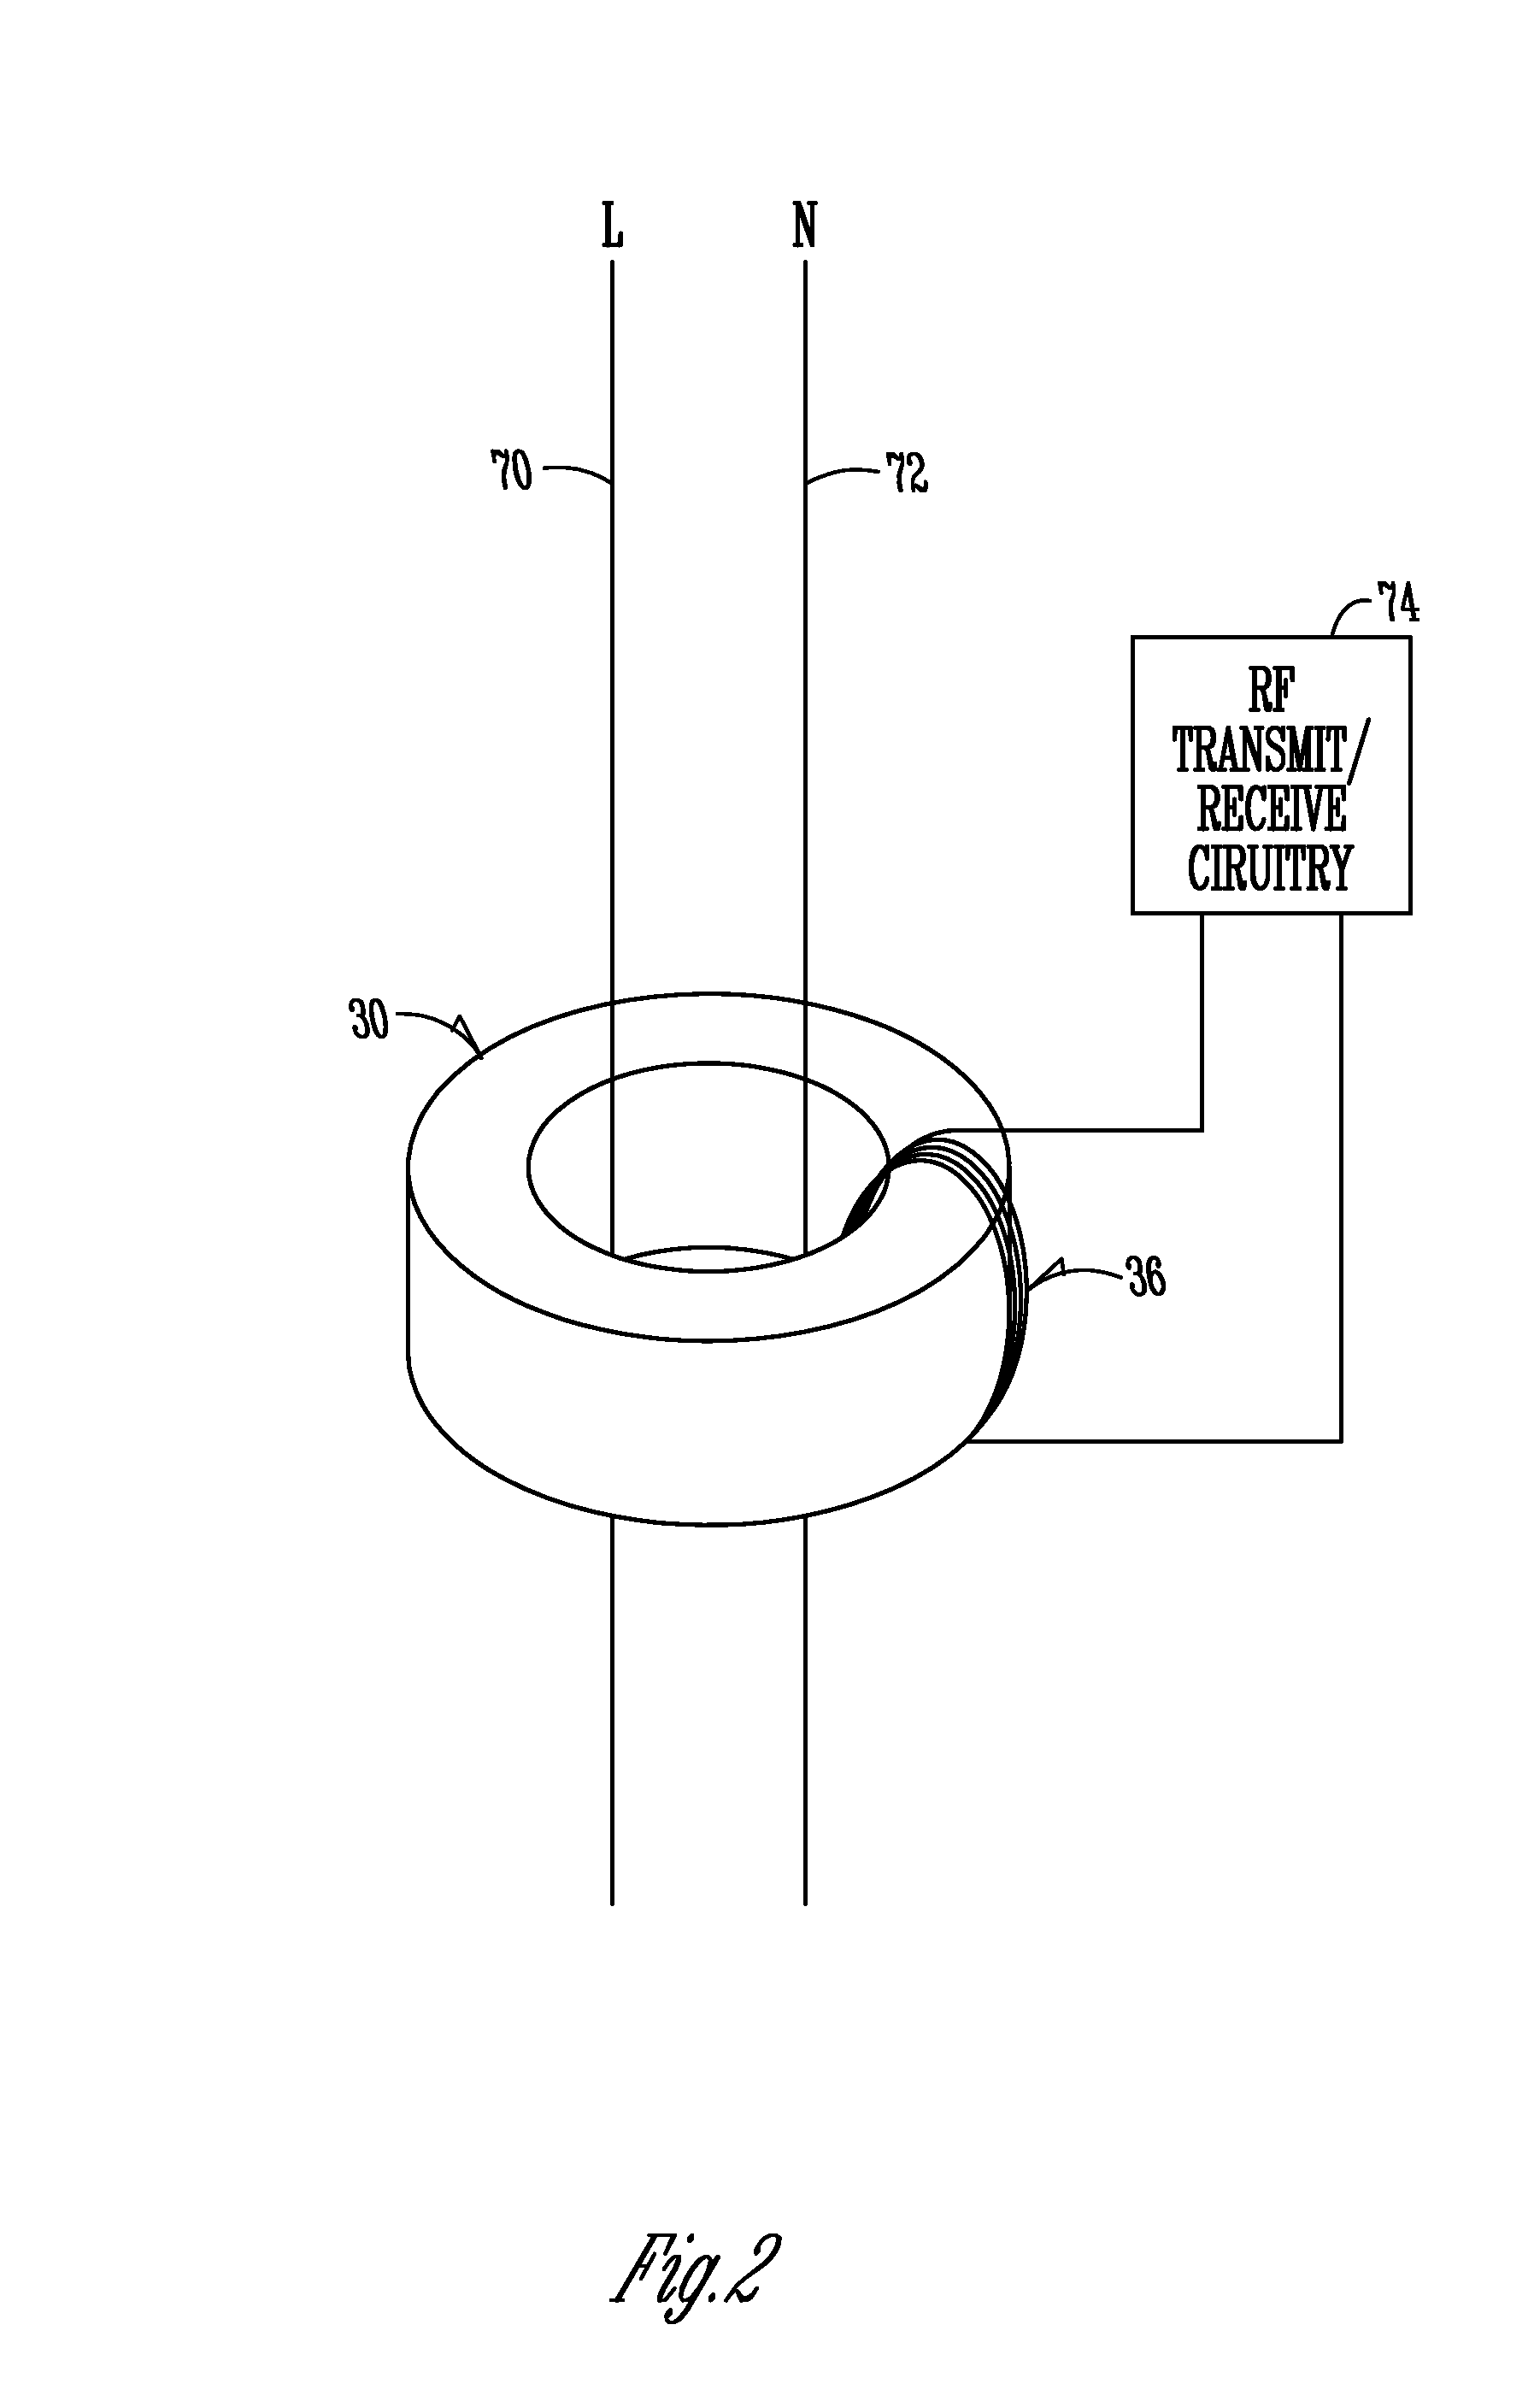 Communication using multiple conductor cable